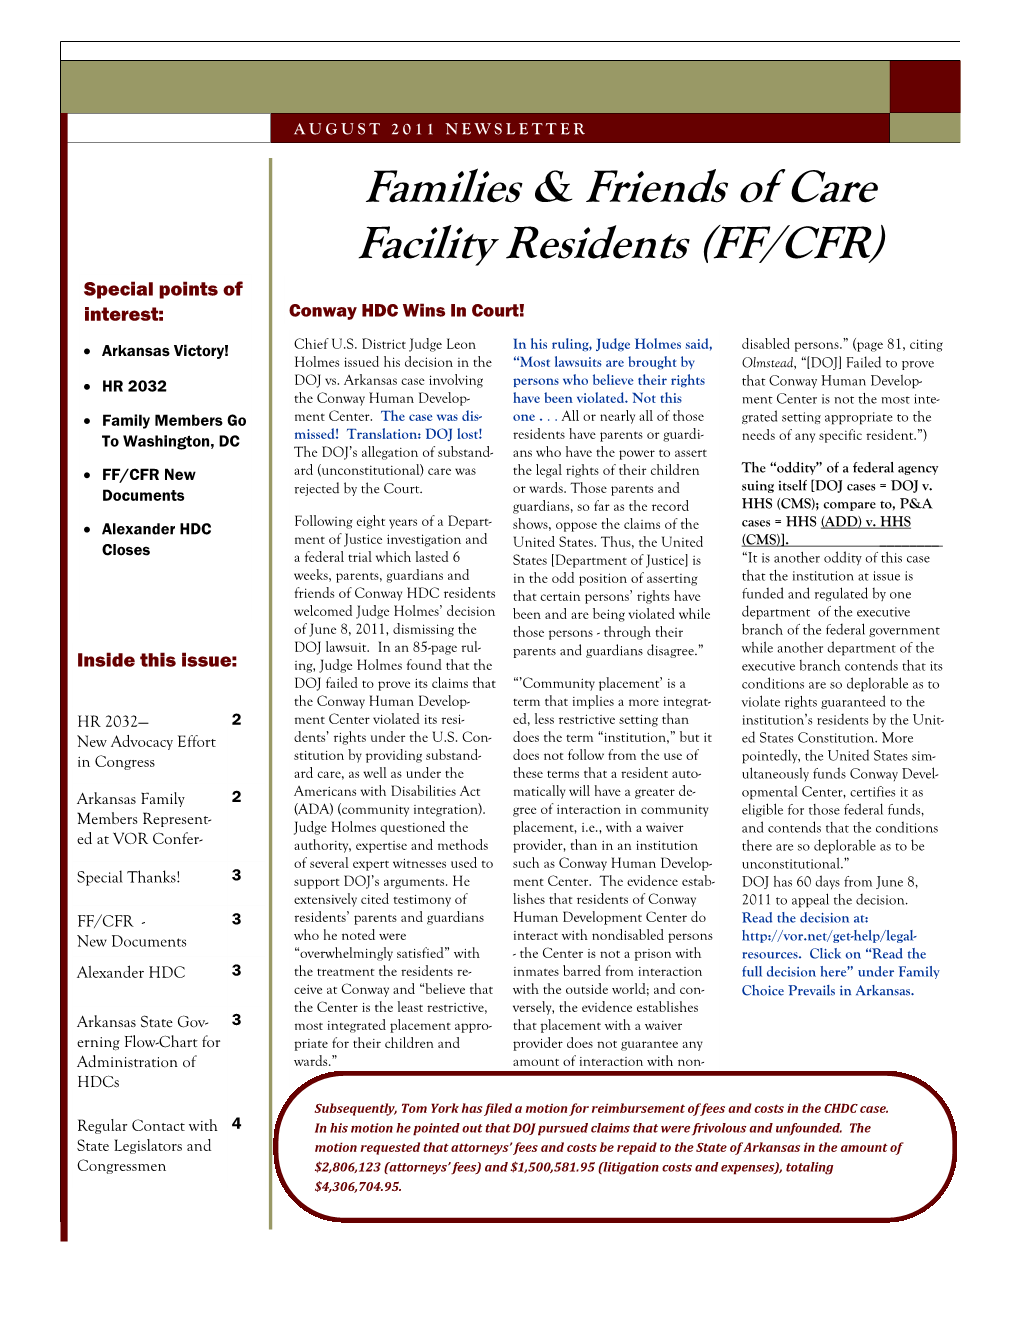 Families & Friends of Care Facility Residents (FF/CFR)